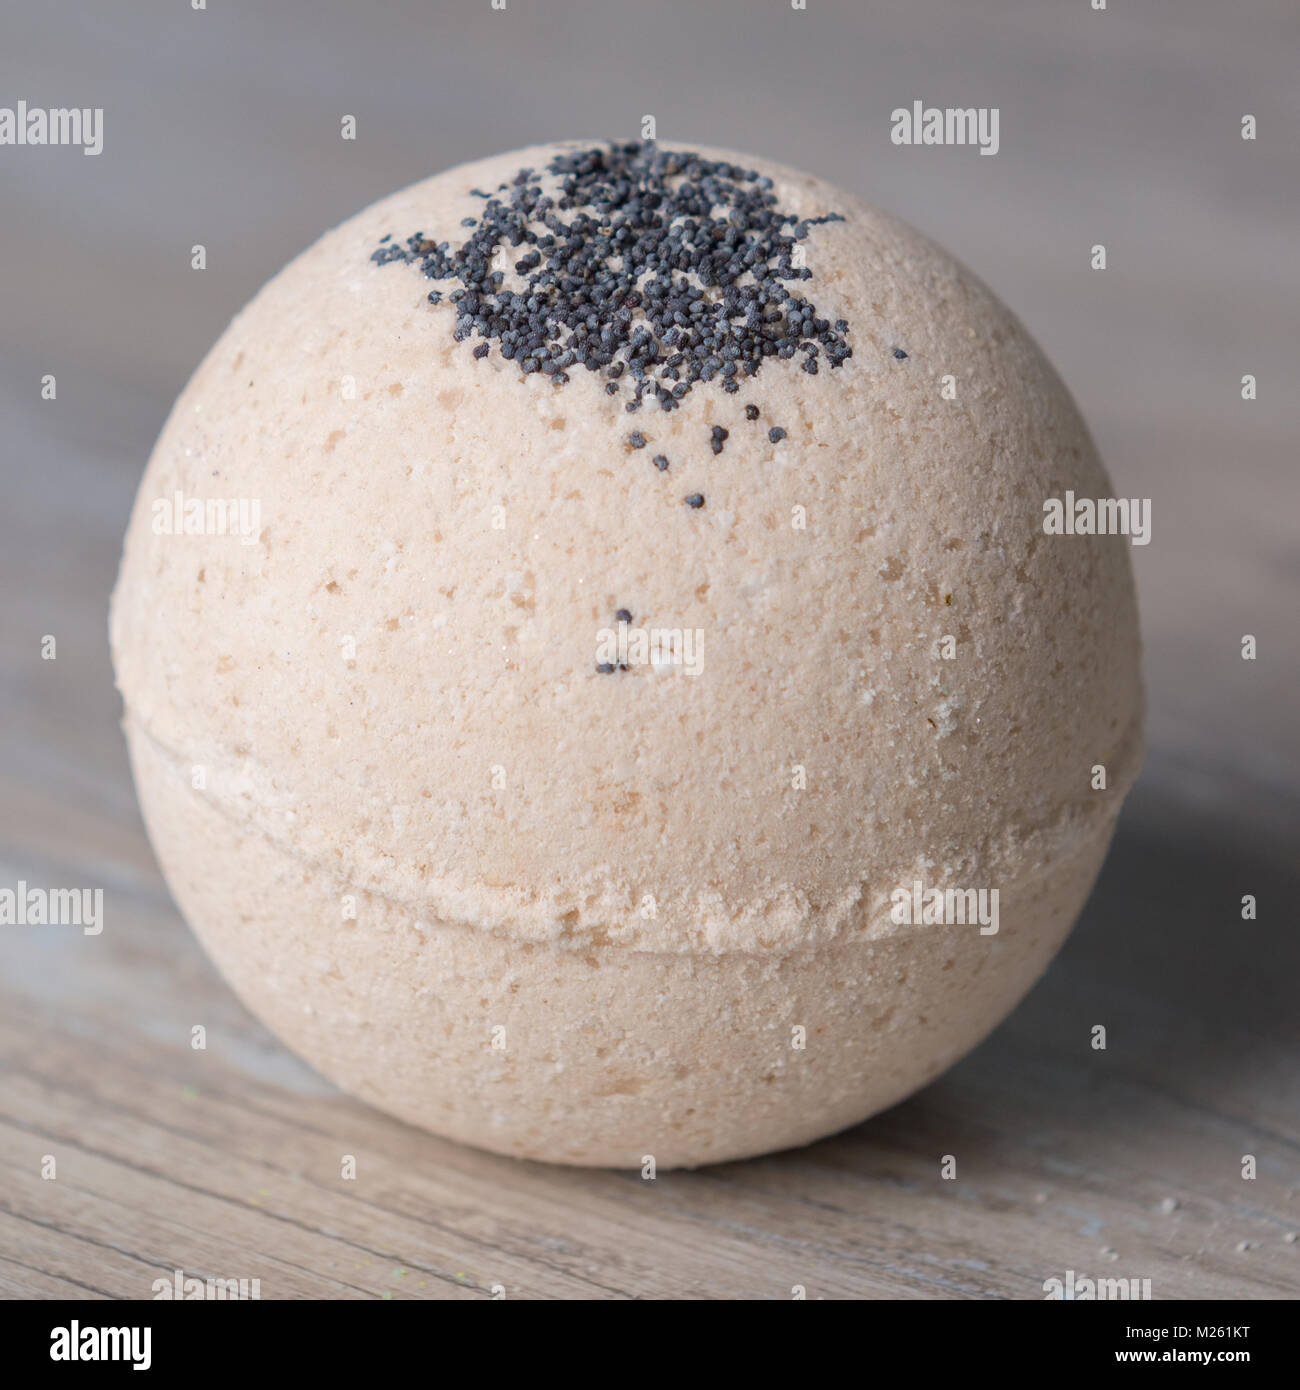 Scope bath. Cosmetic bomb. Meant for relaxation and body care Stock Photo